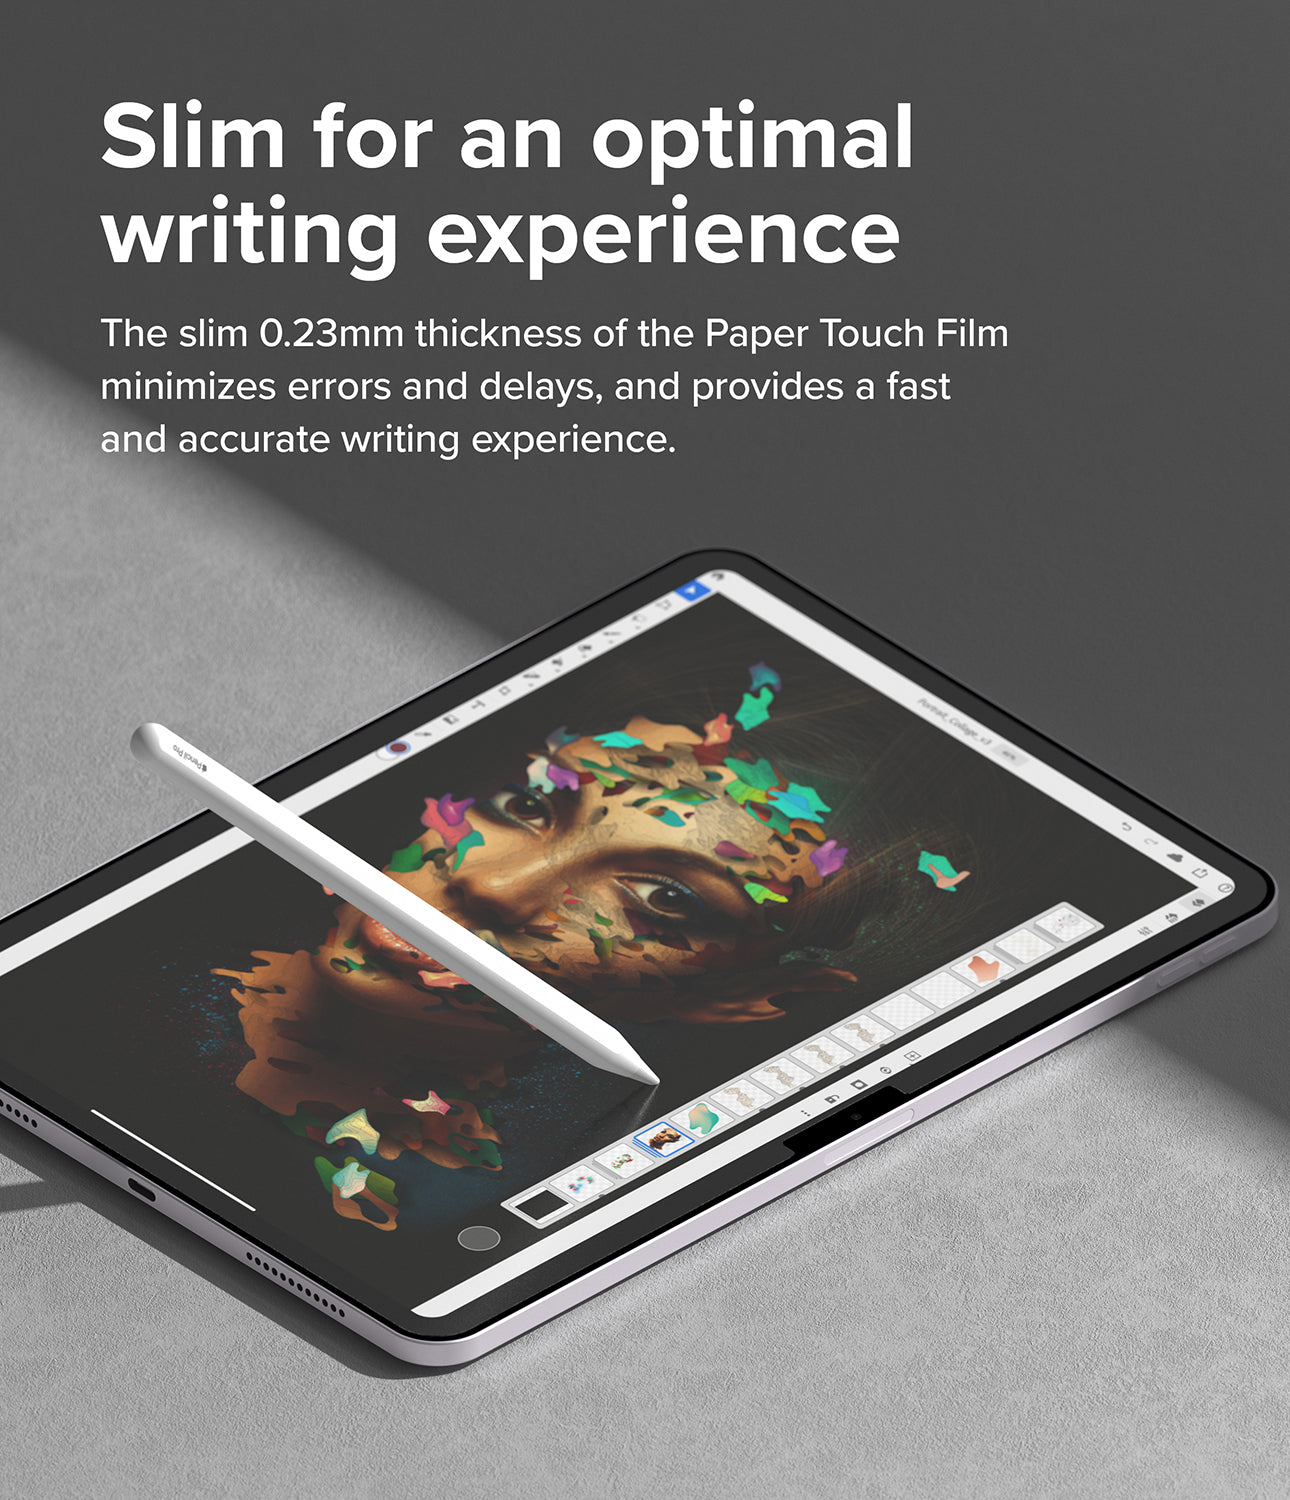 iPad Air 11" (M2) Screen Protector | Paper Touch Film - Hard - Slim for an optimal writing experience. The slim 0.23mm thickness of the Paper Touch Film minimizes errors and delays, and provides a fast and accurate writing experience.